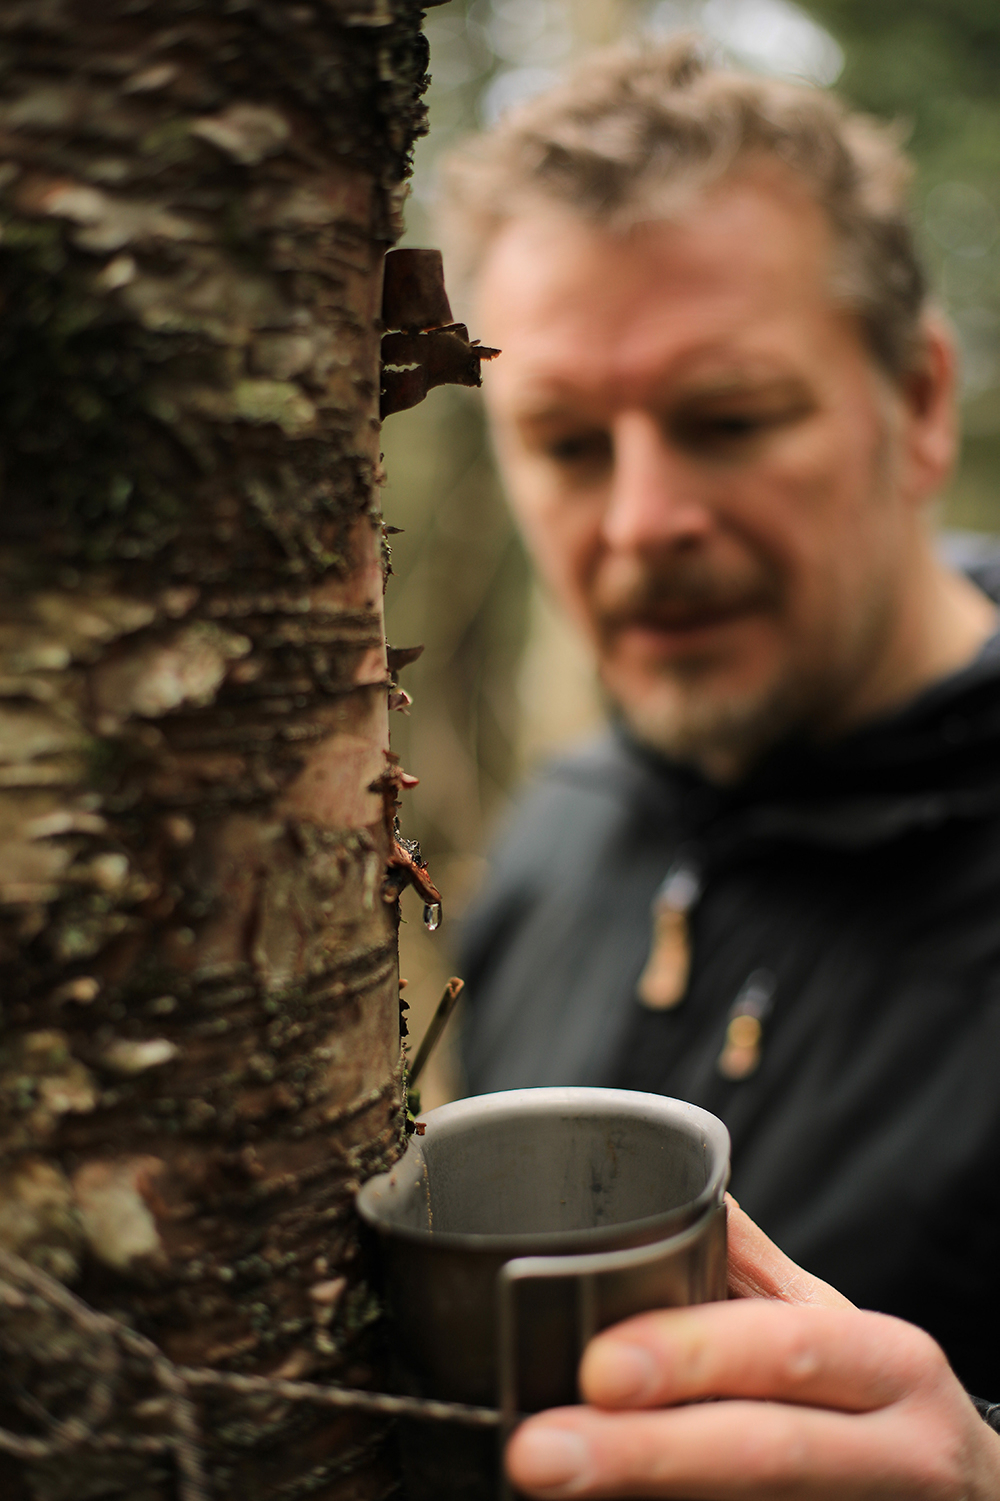 Chris Morgan collecting sap from tree